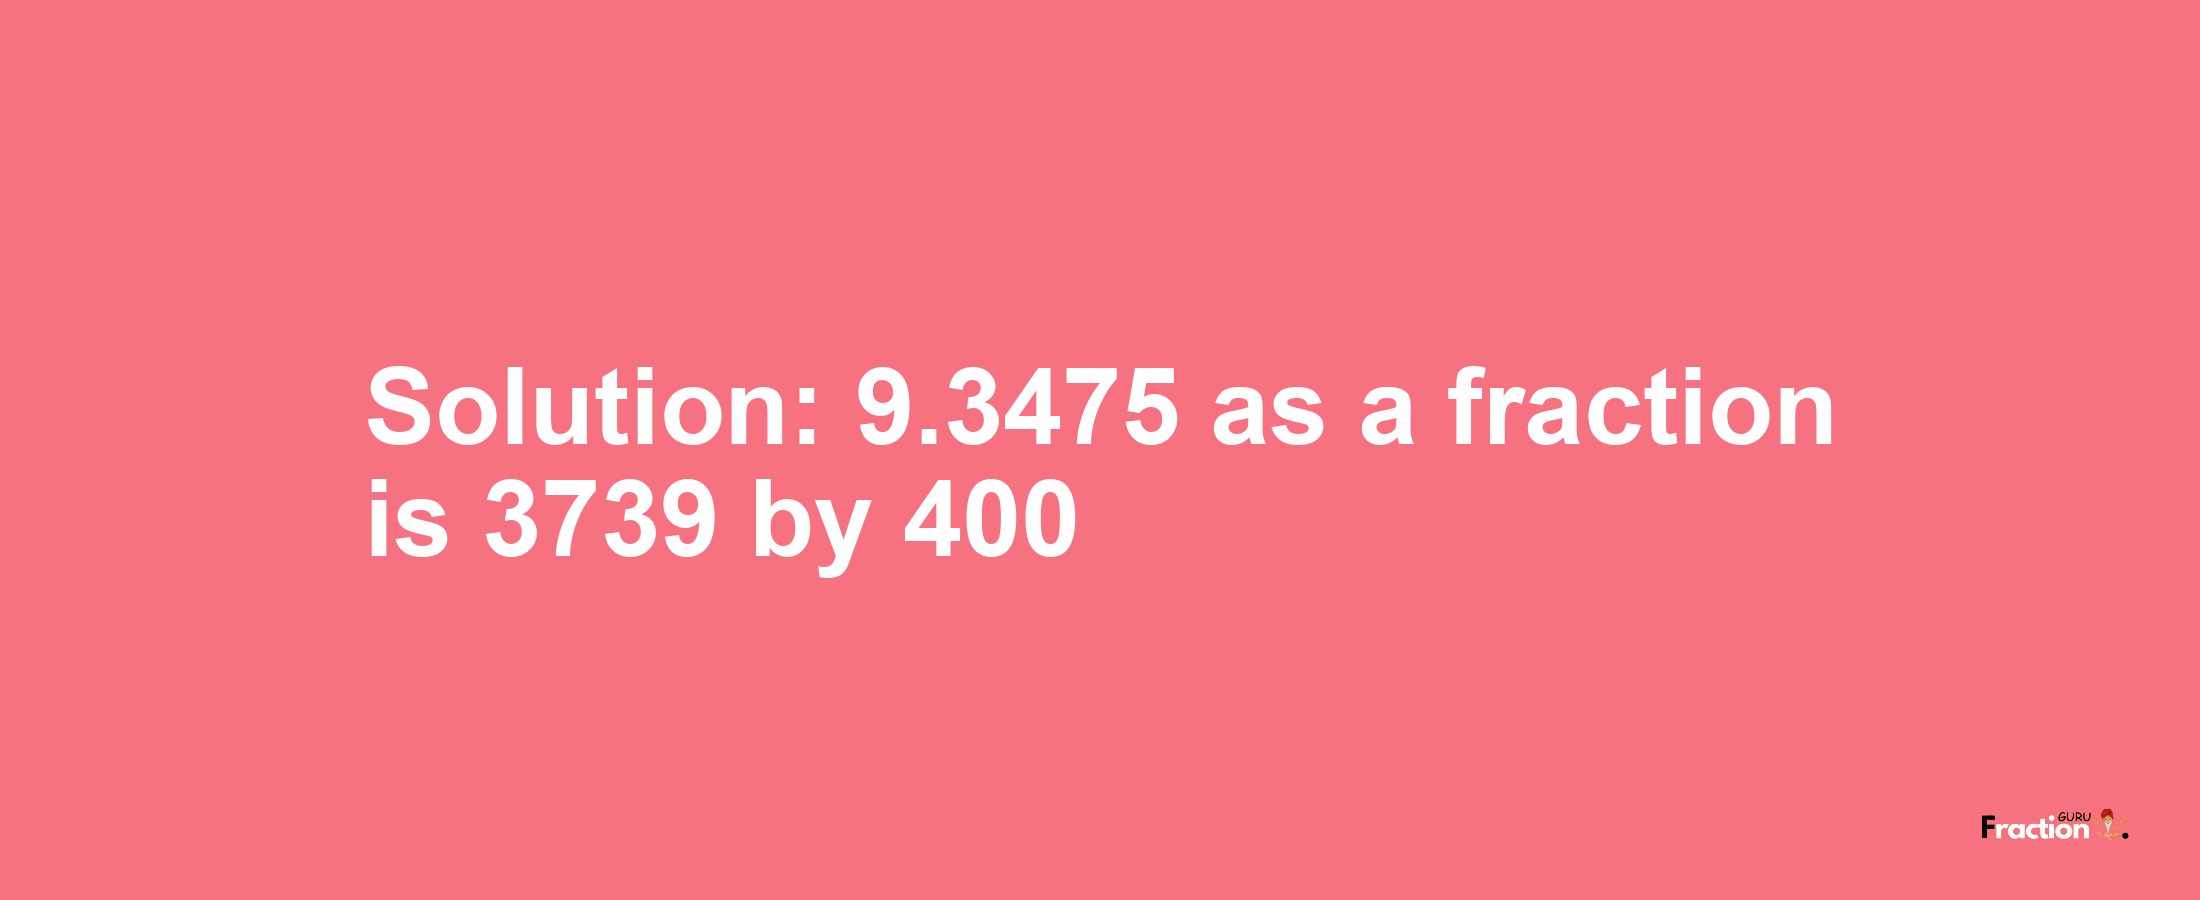 Solution:9.3475 as a fraction is 3739/400